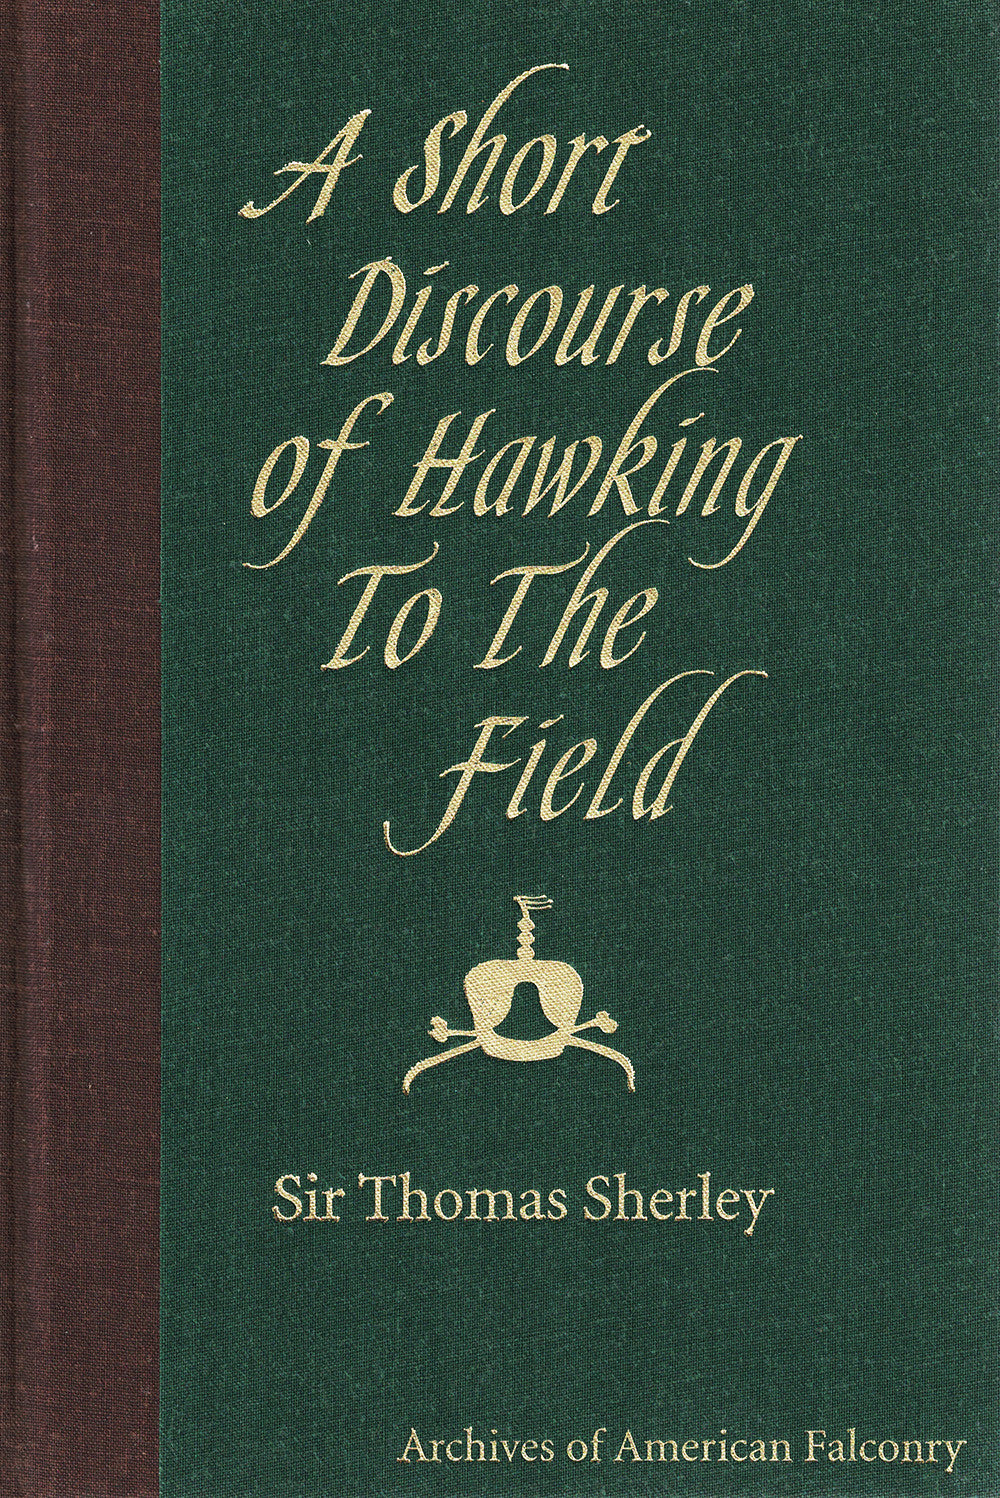 A Short Discourse of Hawking to the Field